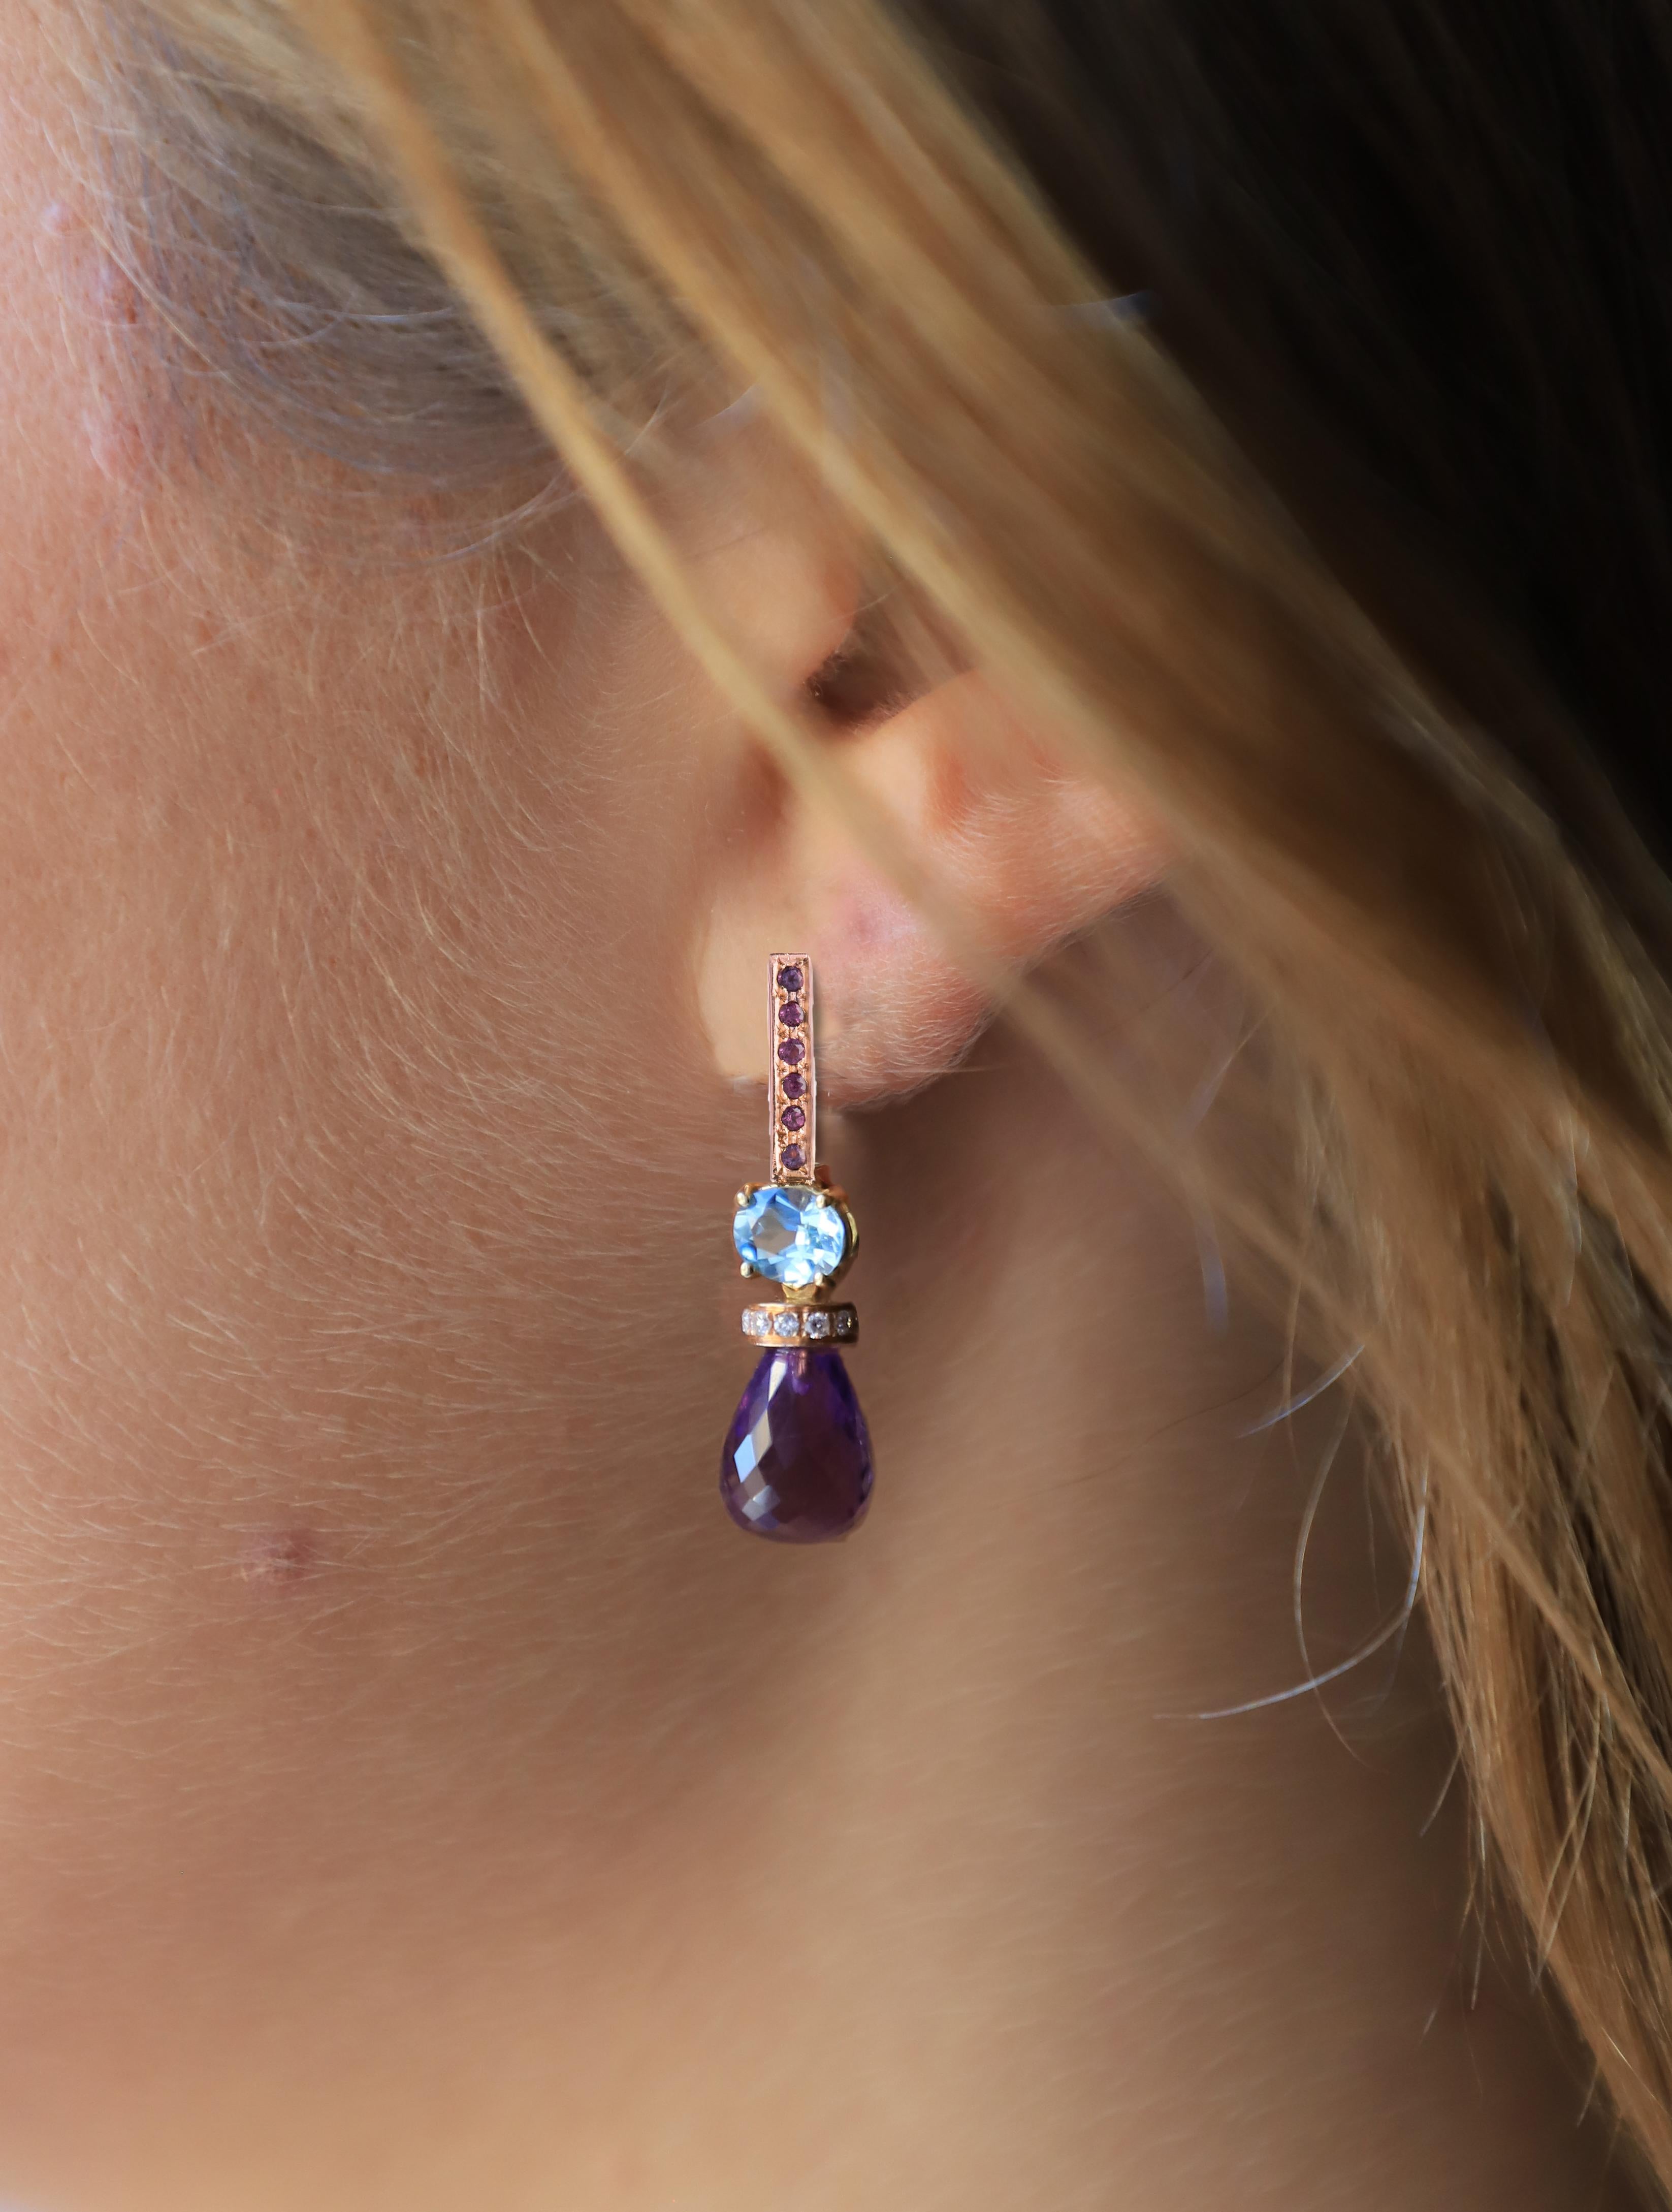 4 Karats Aquamarine 18 Karat Rose and White Gold Brilliant Cut 0.14 Karats White Diamonds Amethyst Drops 0.30 Karats Pink Sapphires Dangle Earrings 
A beautiful pair of dangle earrings handcrafted in 18 karats rose and white gold, embellished with